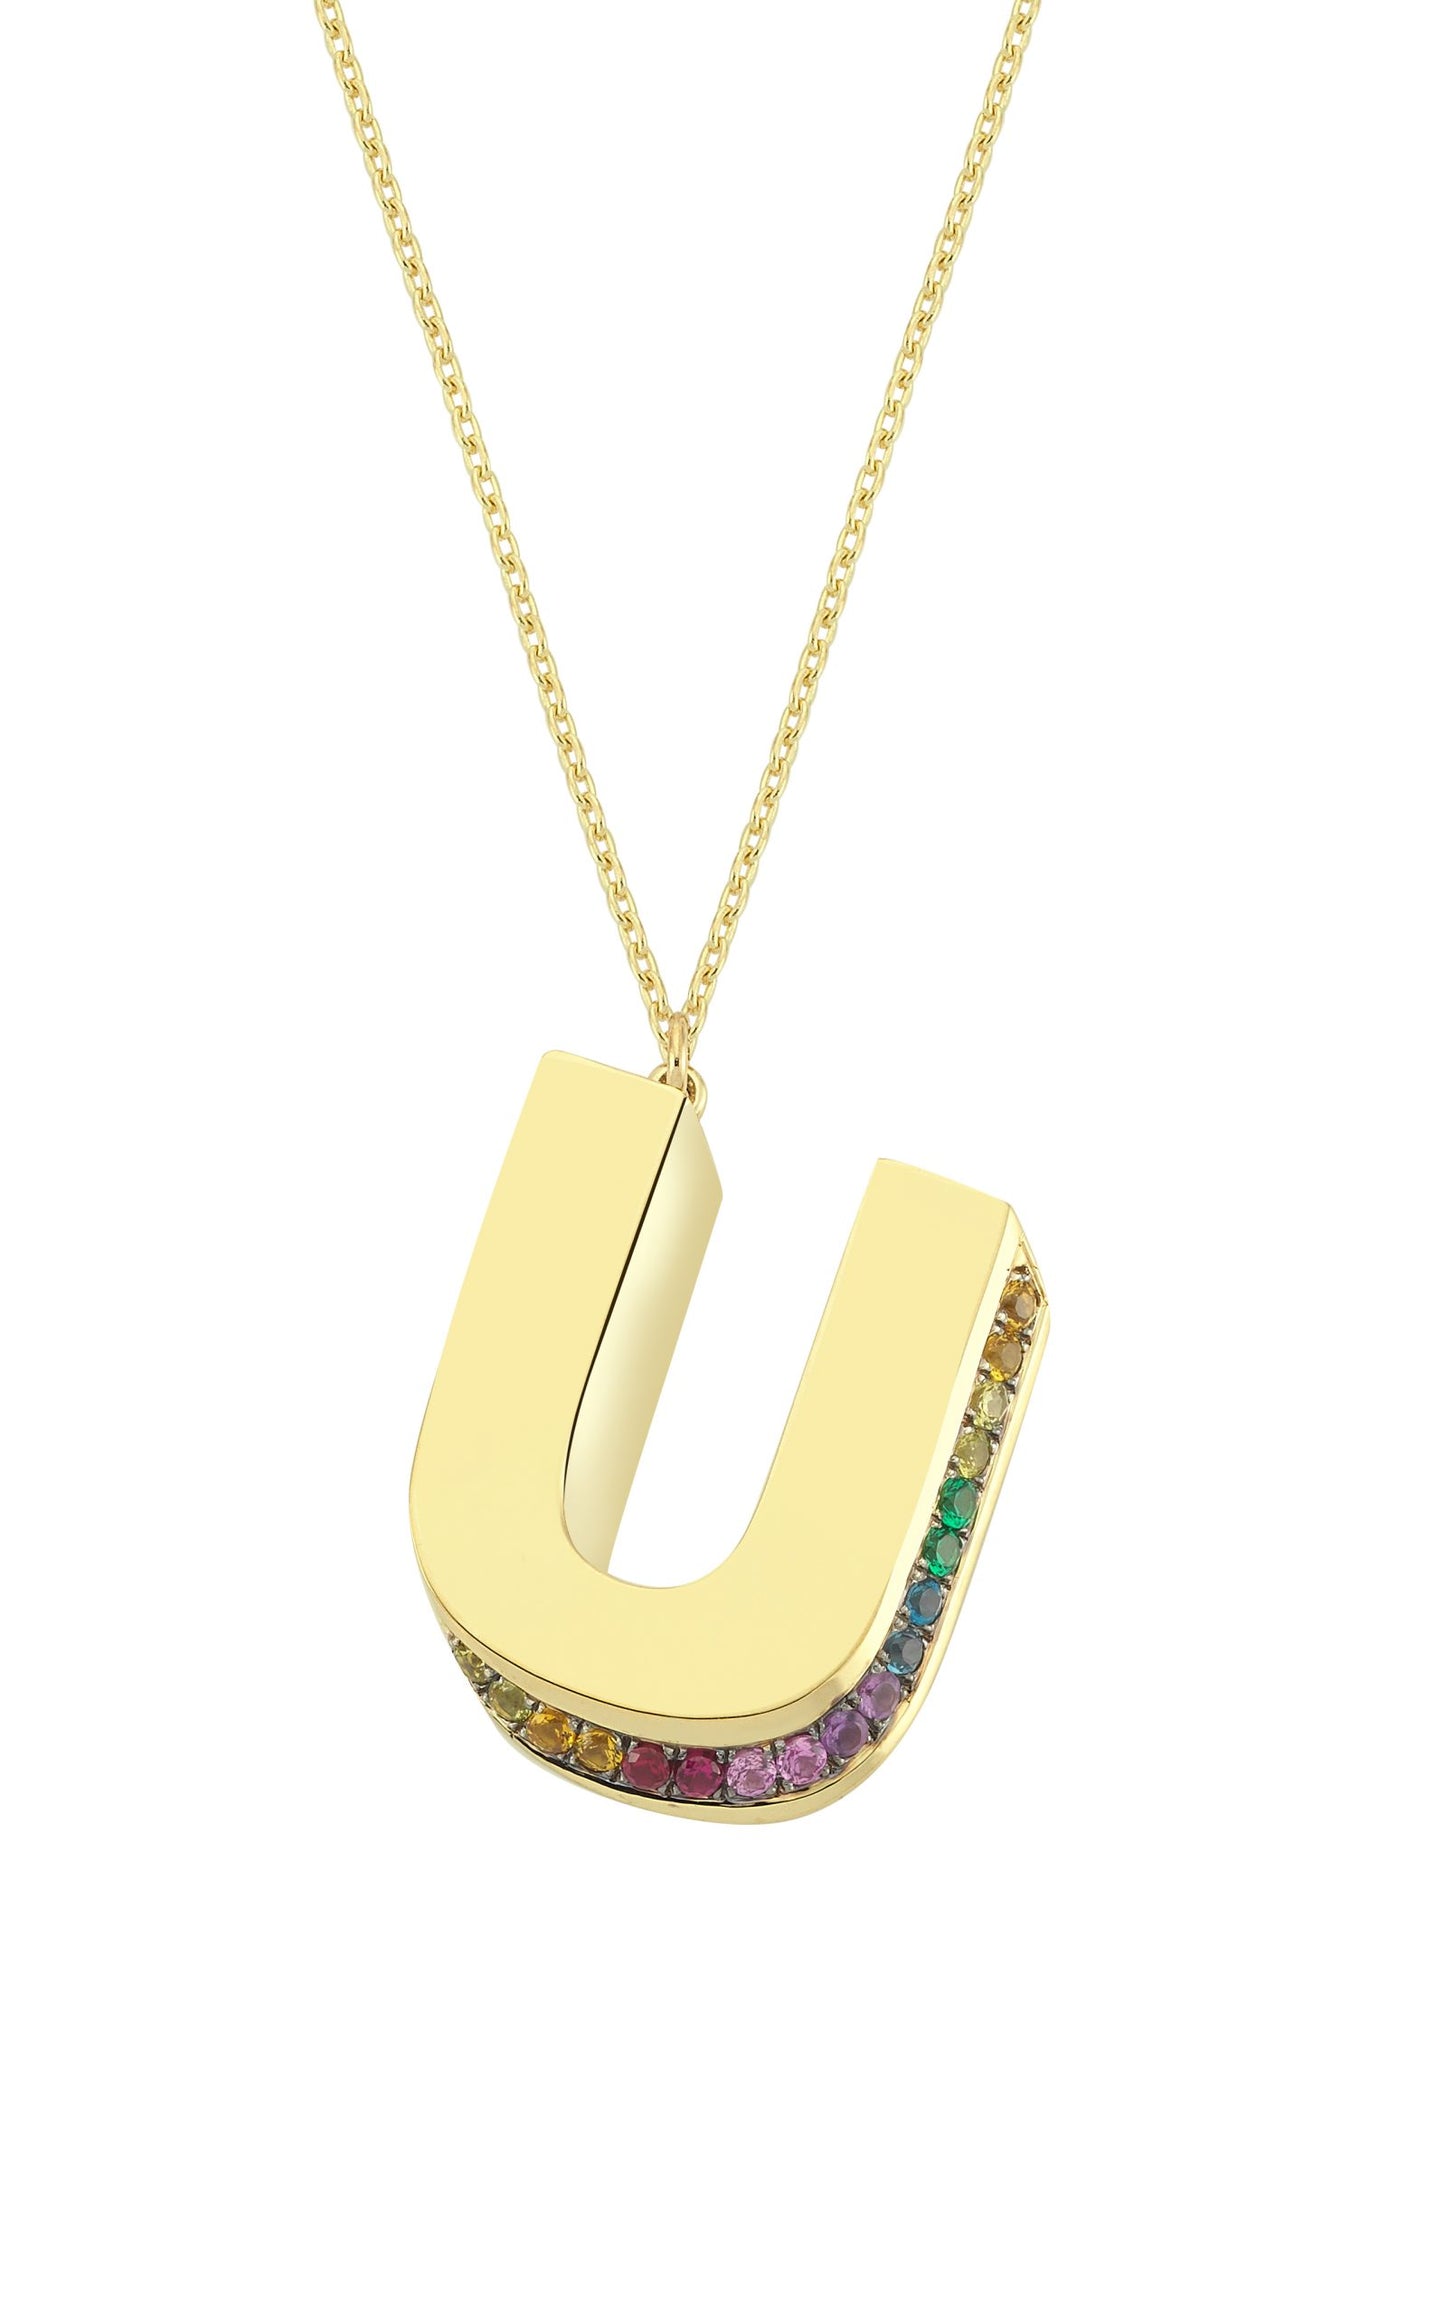 3D U Letter Necklace with Rainbow Sapphires